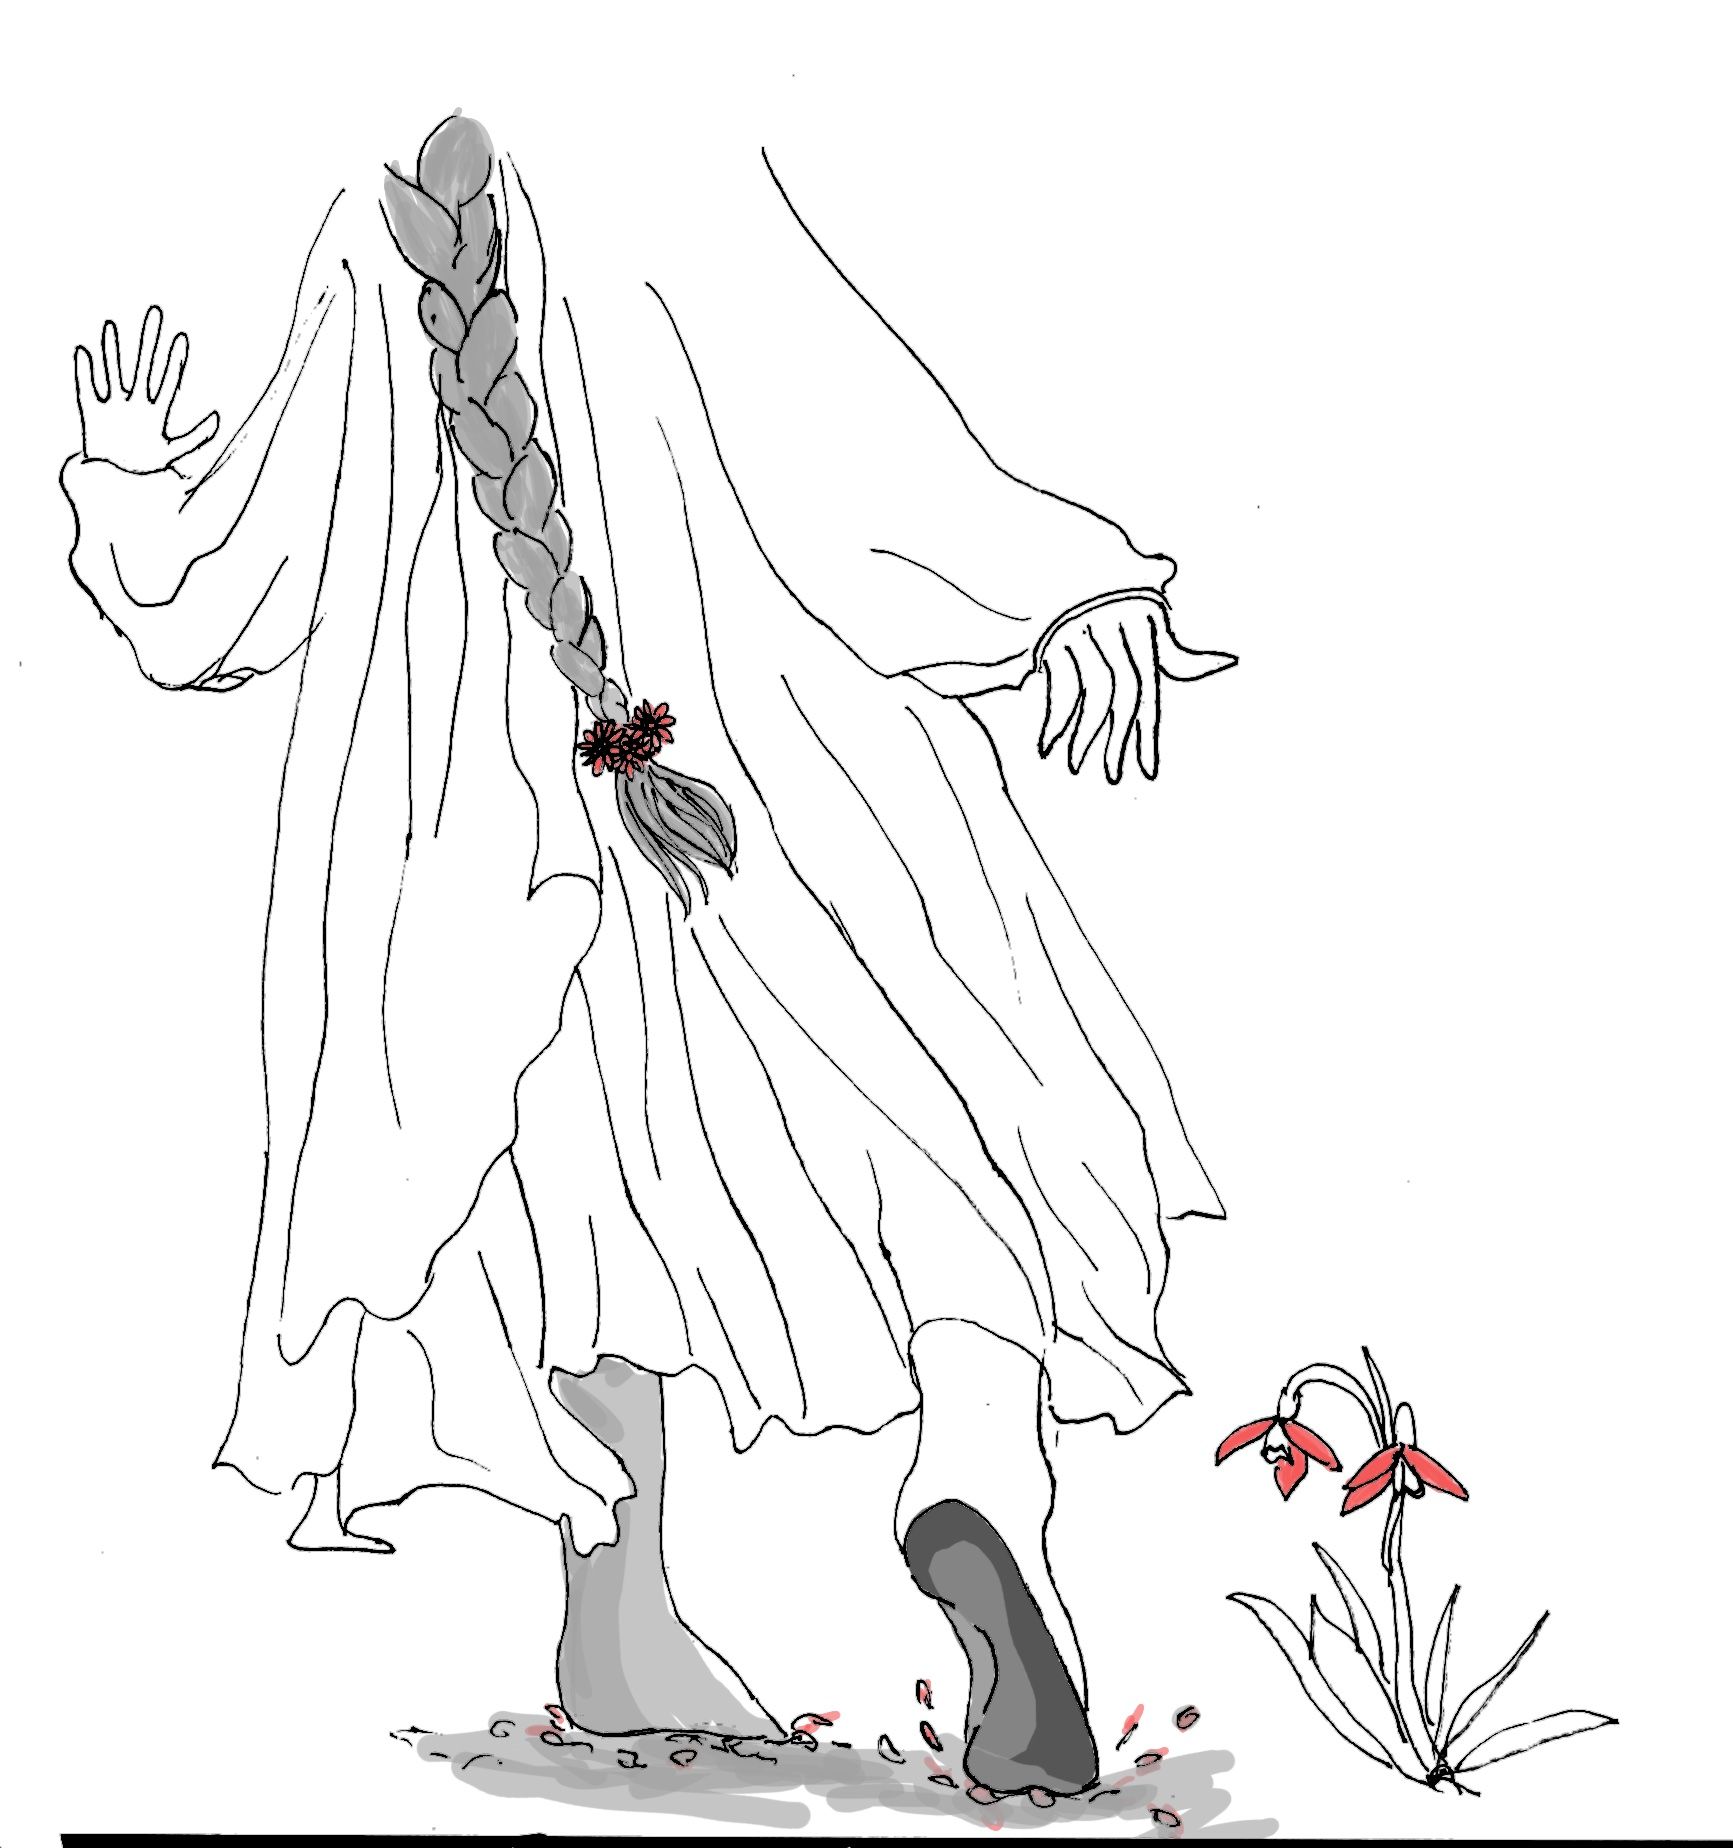 A scanned illustration of a woman's body in a long white dress with her head cropped out. She's turned away and stepping on a red flower.